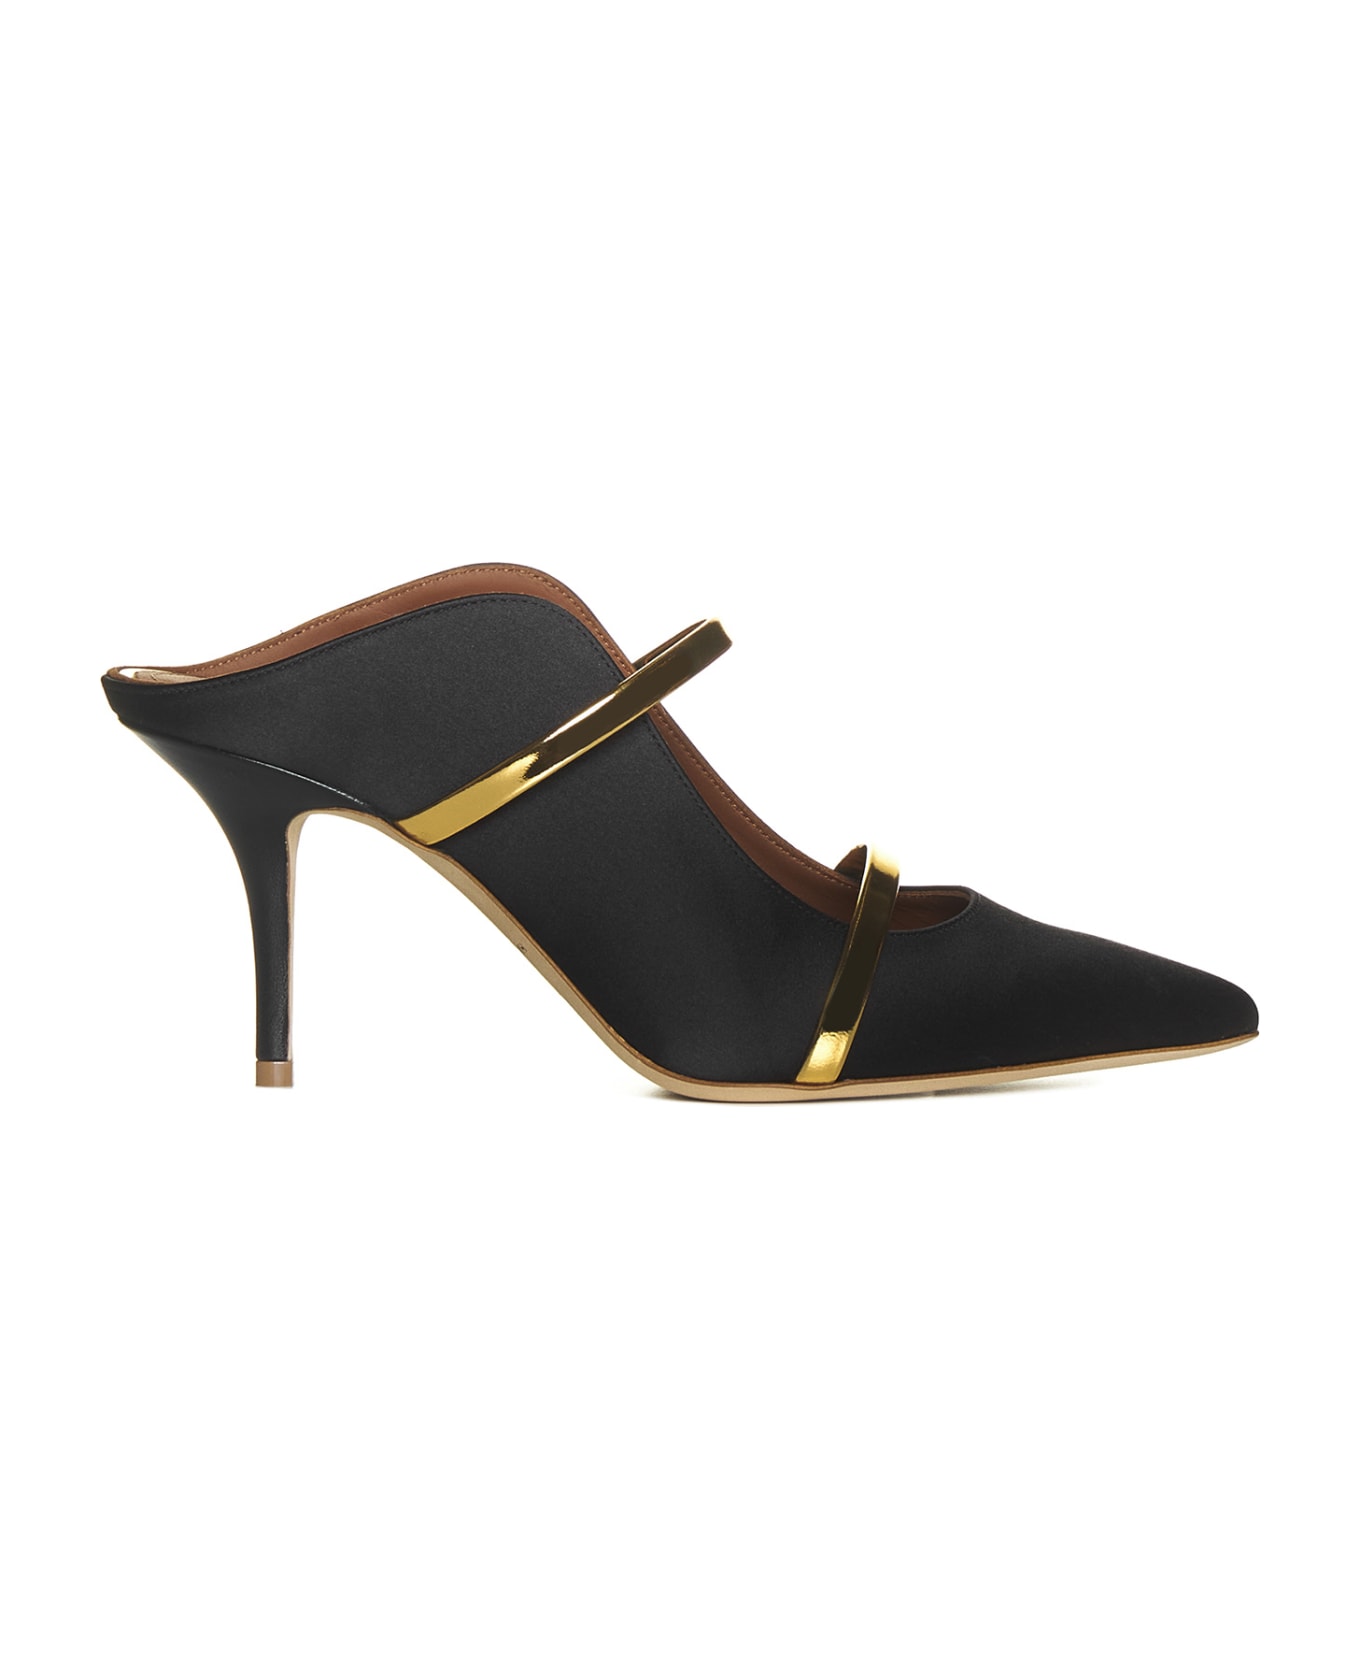 Malone Souliers Flat Shoes - Black/gold blk